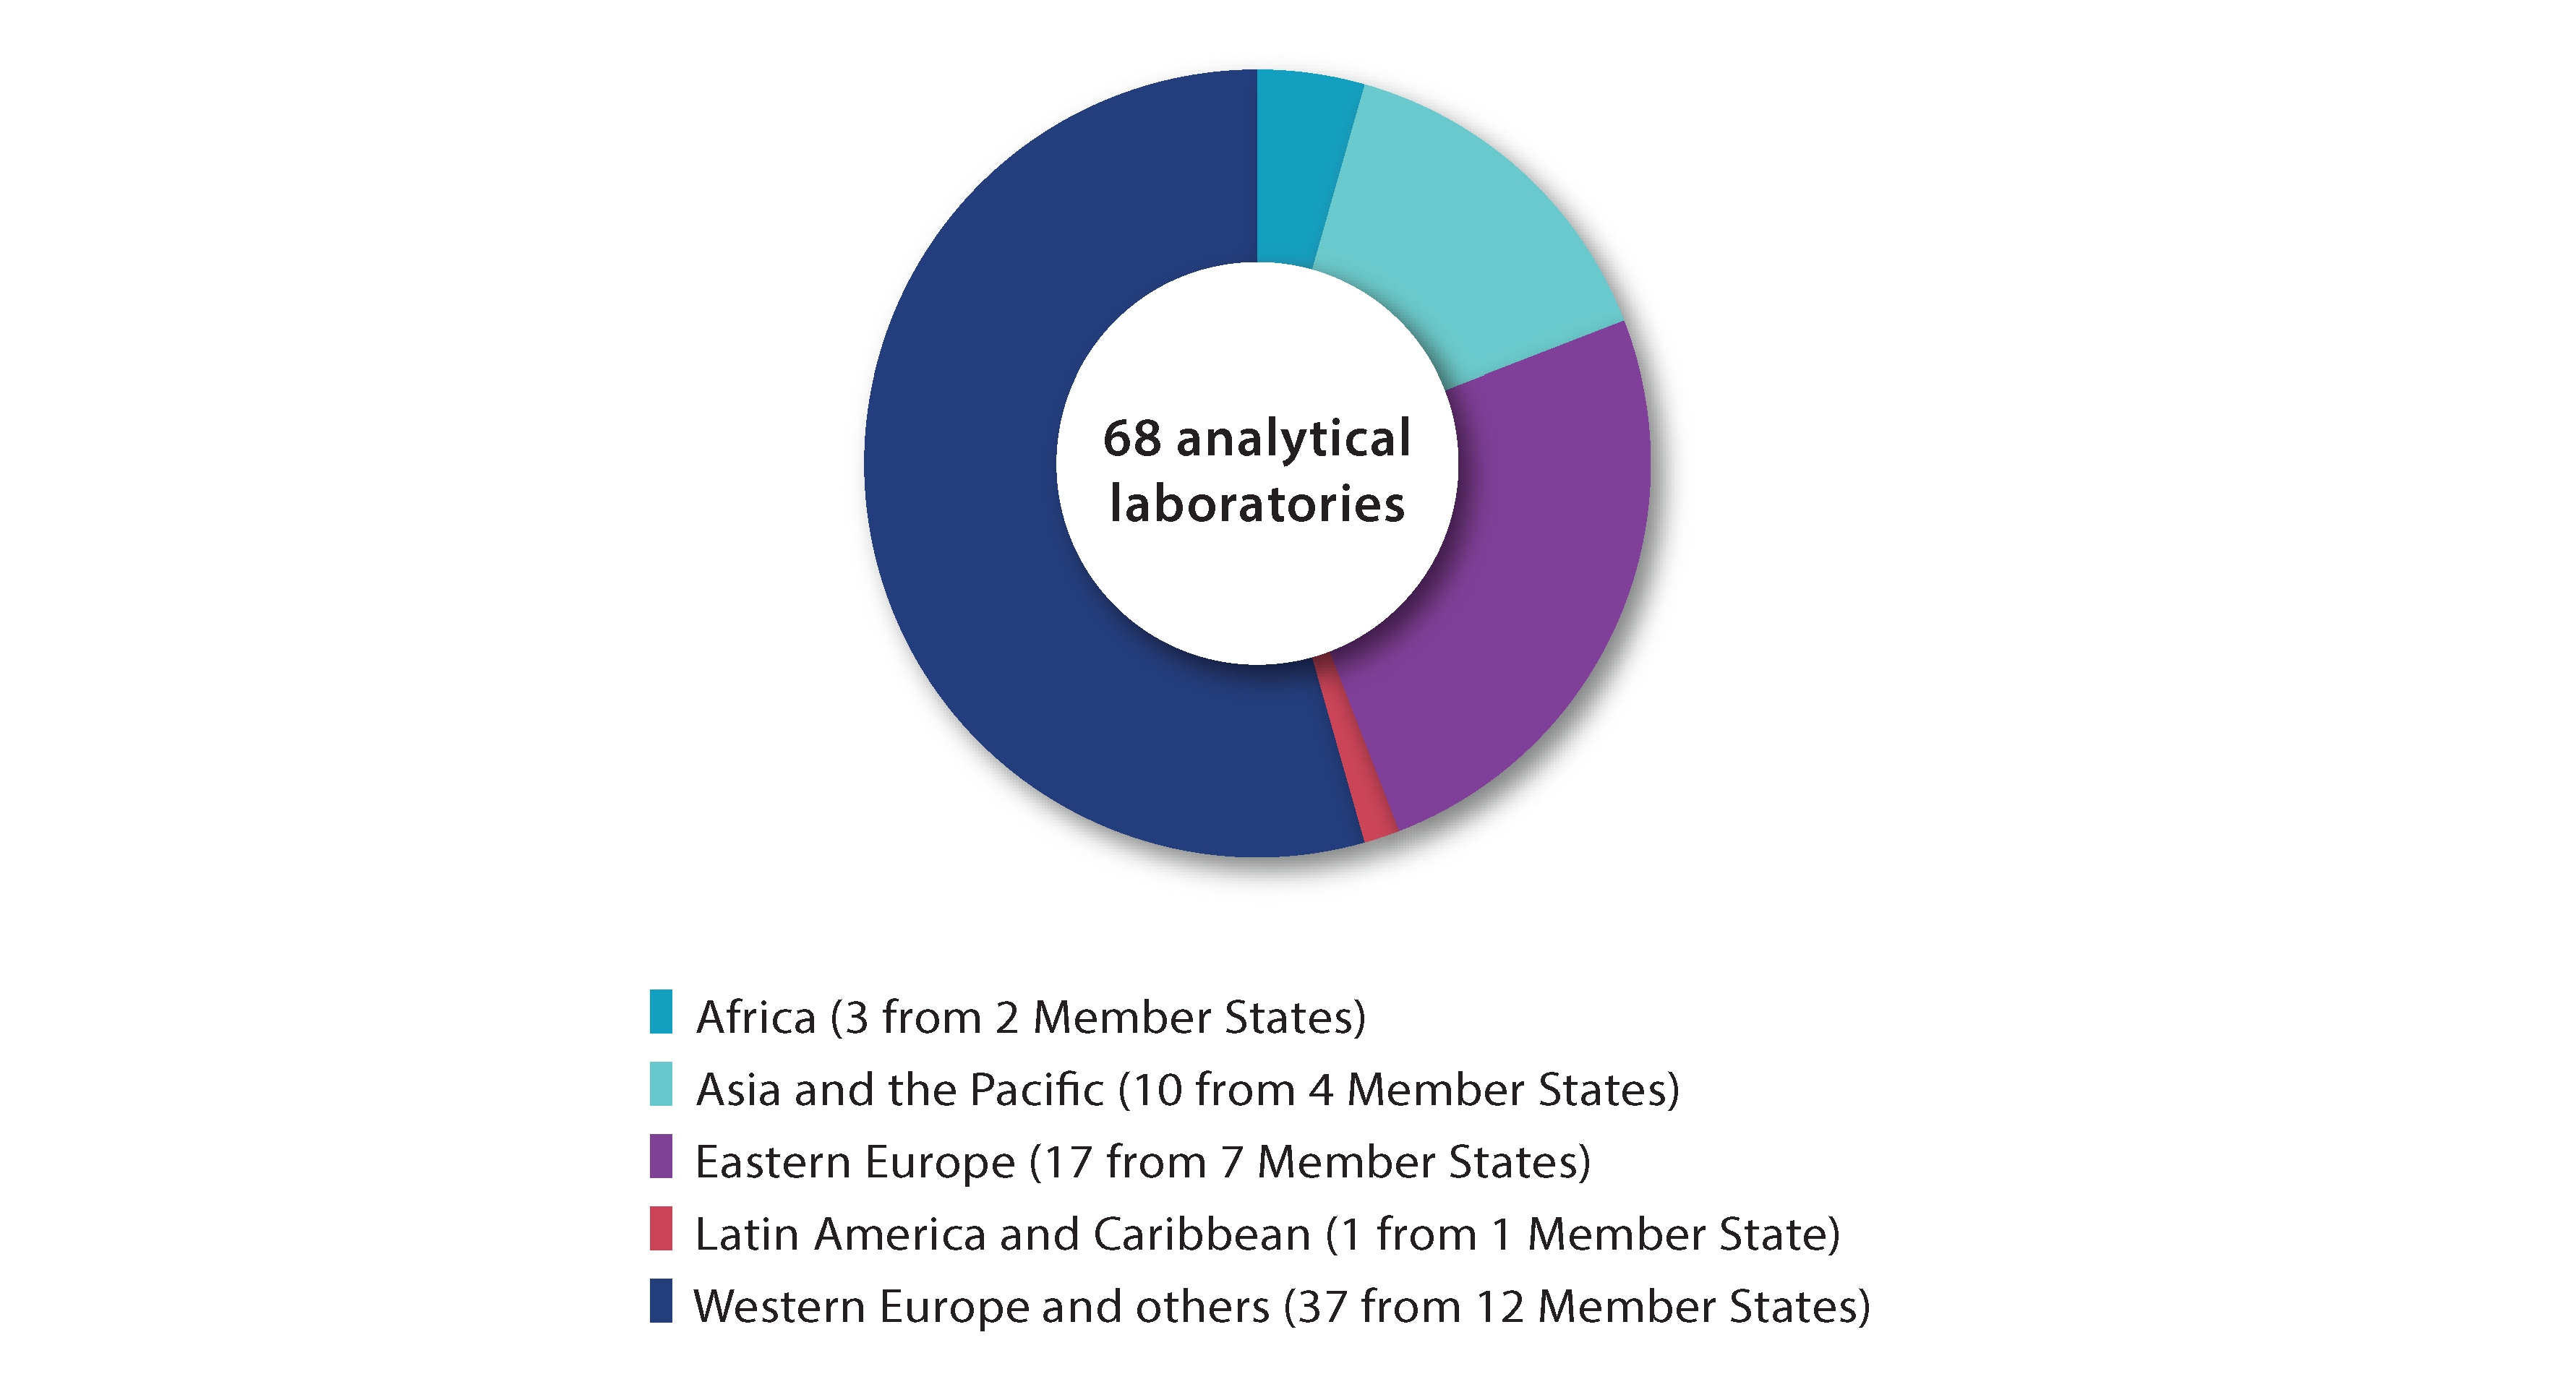 Pie chart showing distribution by region of analytical laboratories